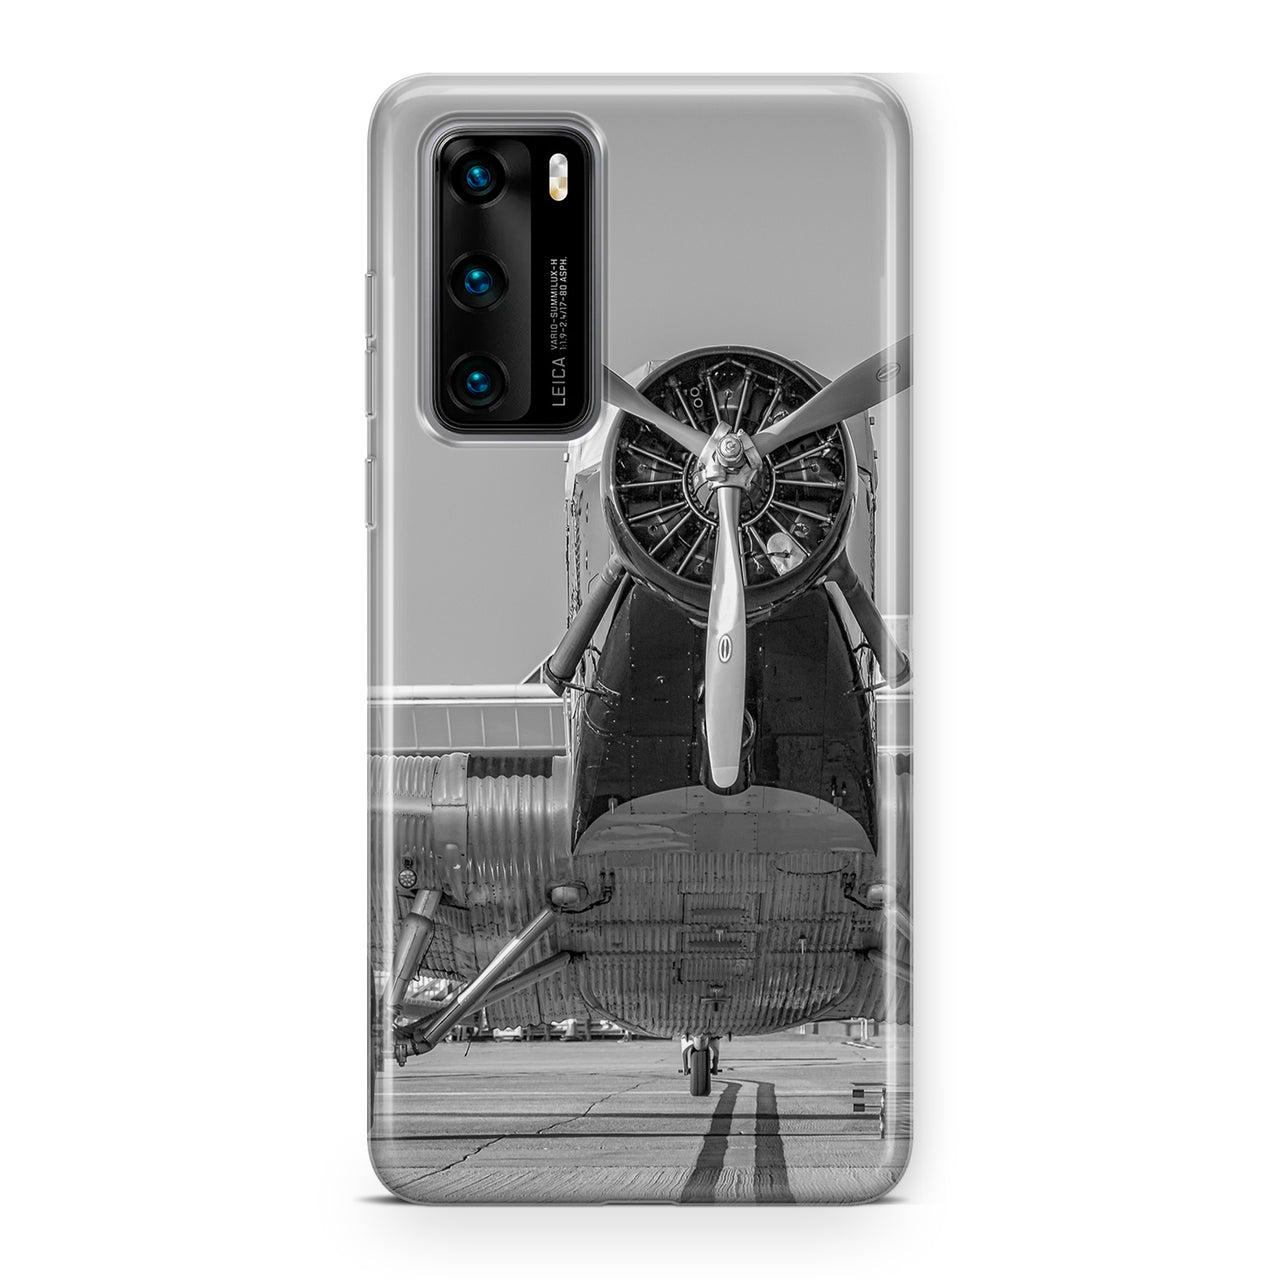 Face to Face to 3 Engine Old Airplane Designed Huawei Cases